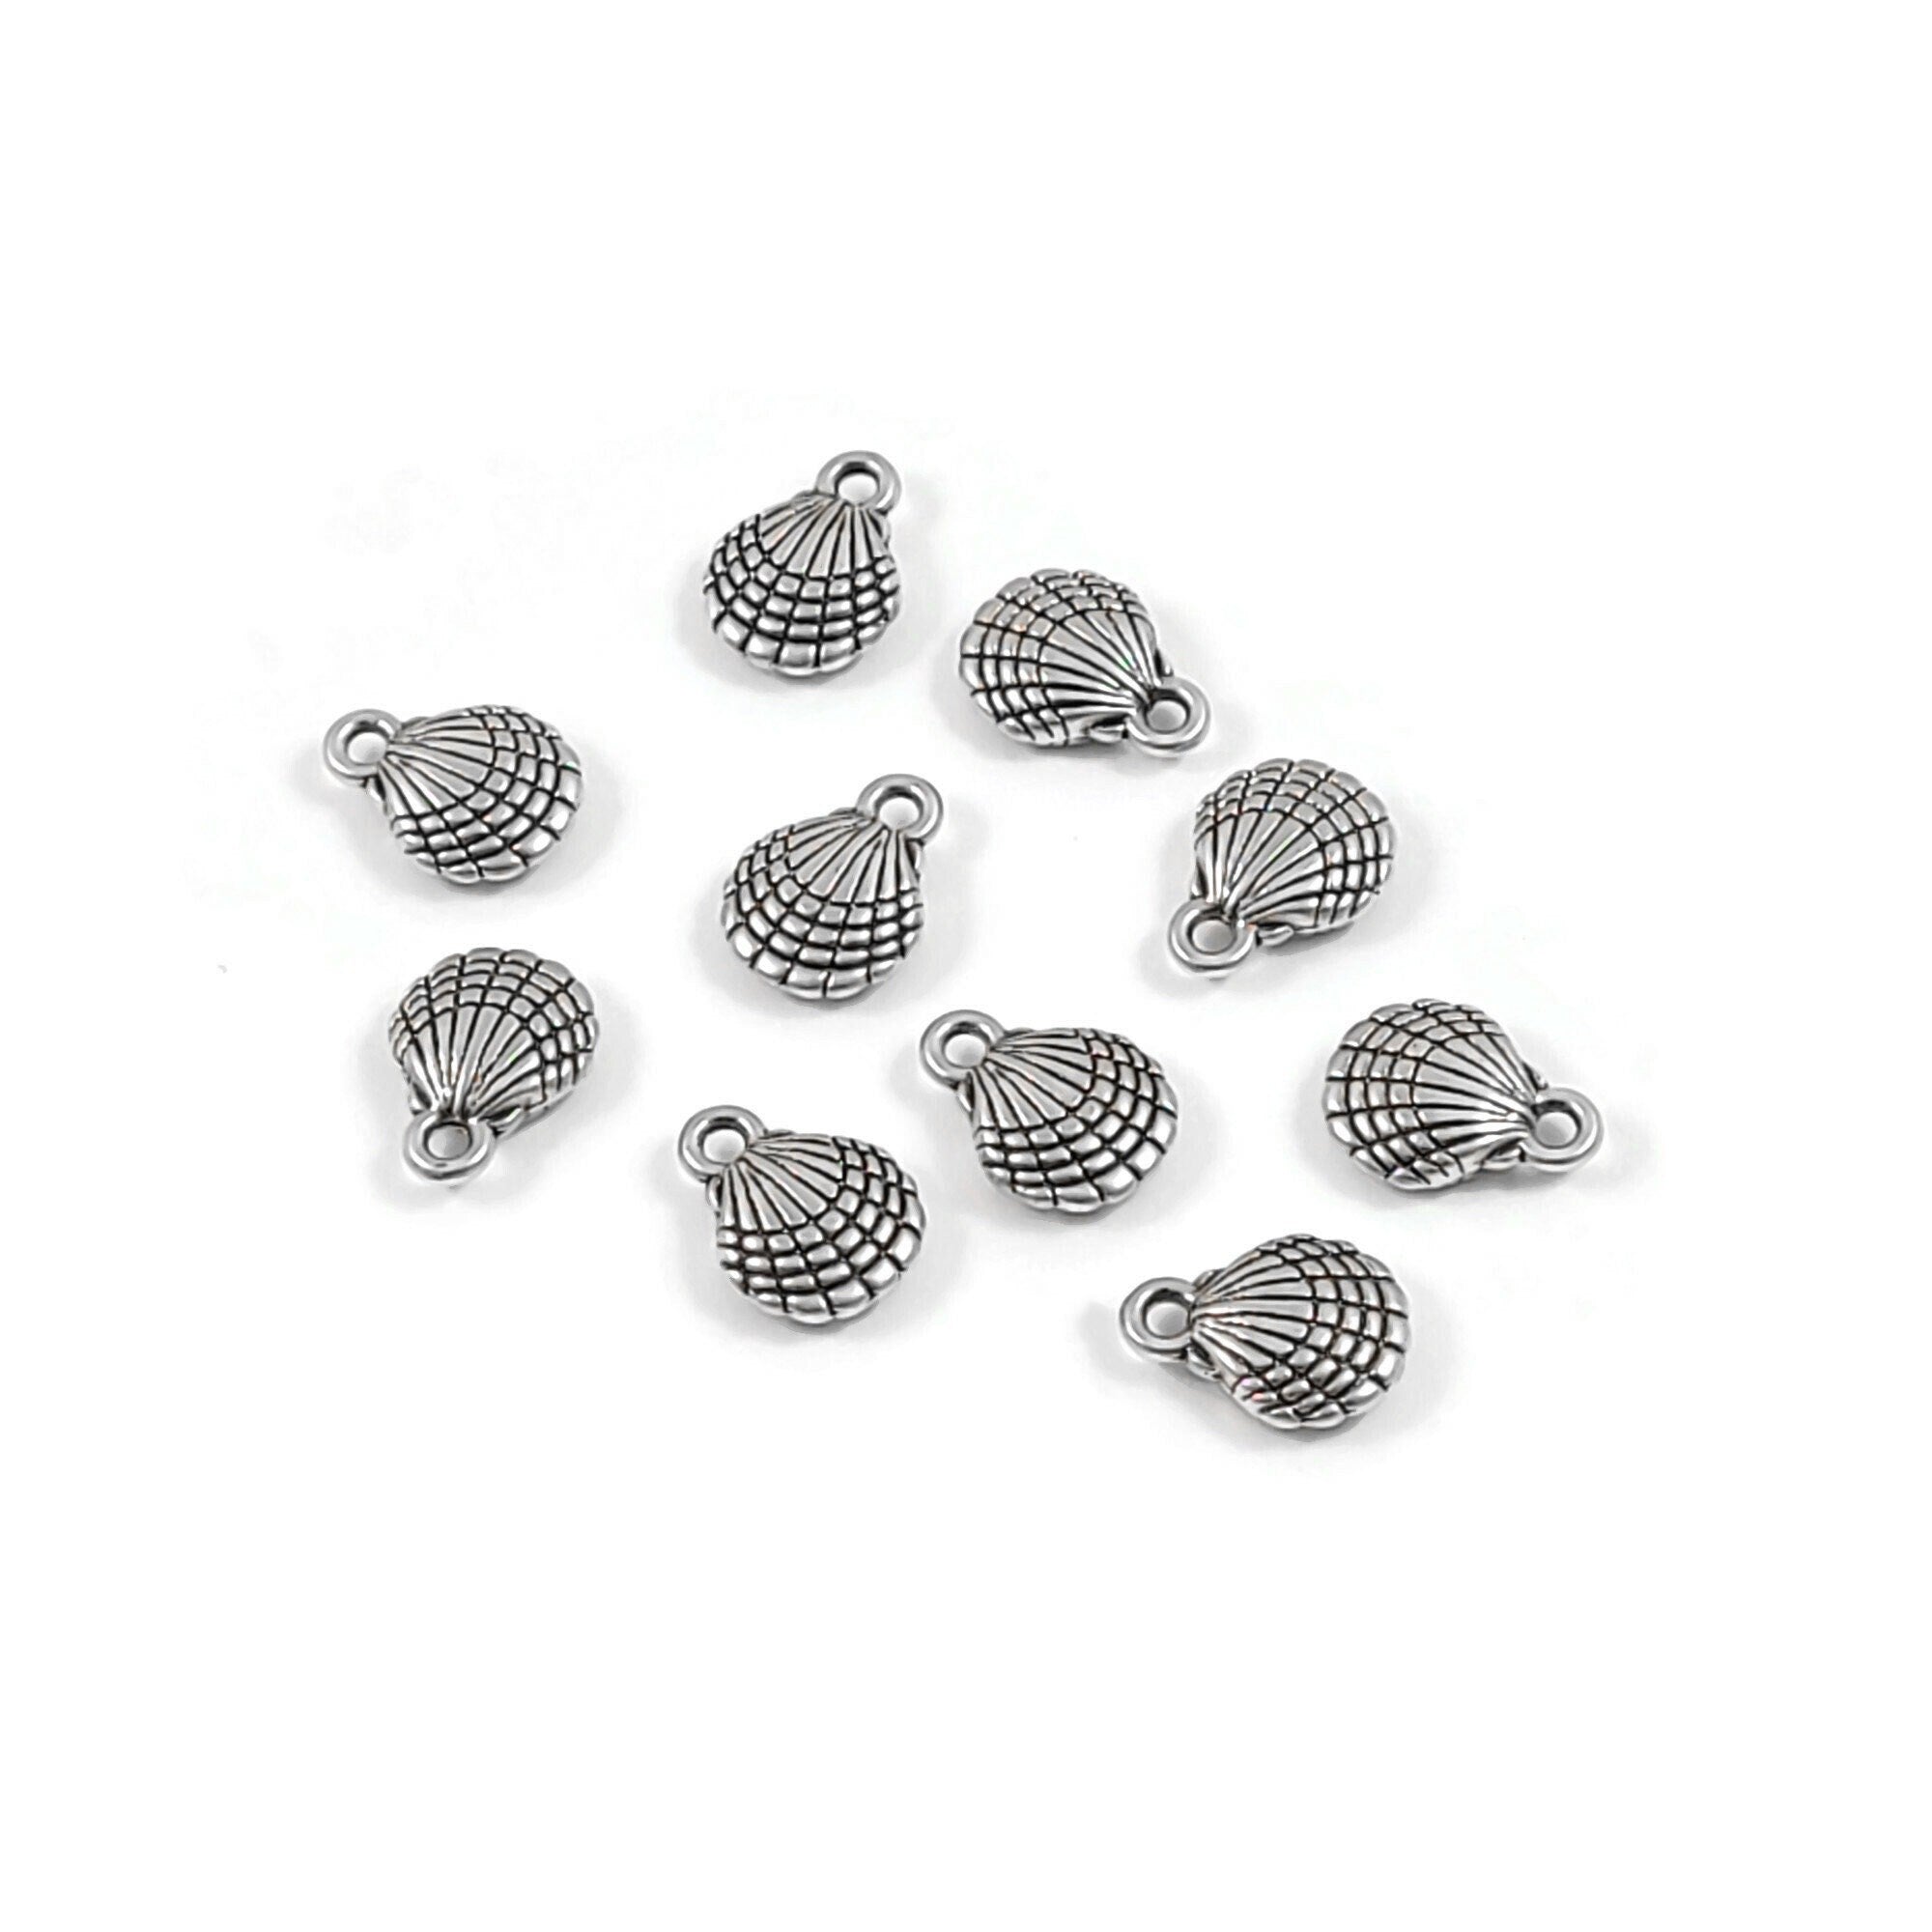 Cute scallop shell charms, 13mm nickel free ocean pendants, Hypoallergenic nautical jewelry making